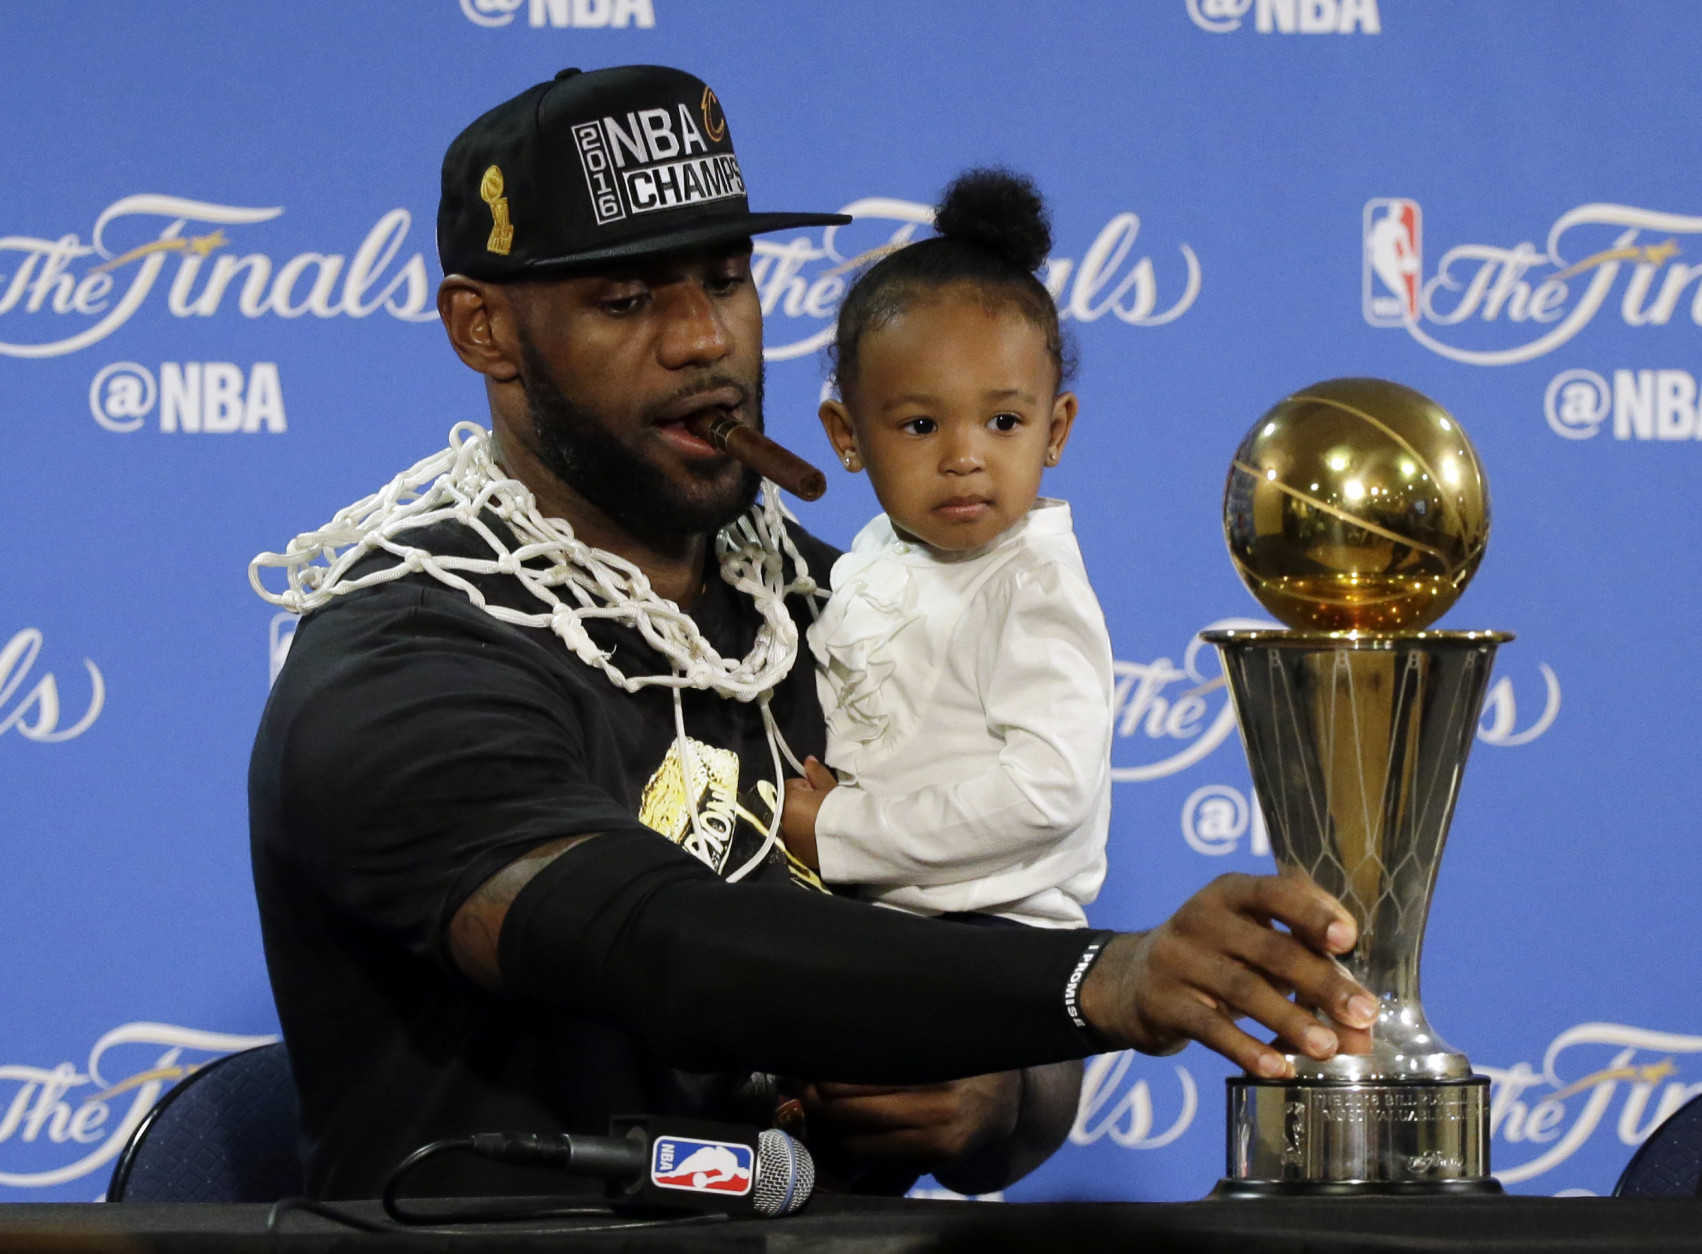 Cleveland Cavaliers' LeBron James sits down to answer questions with his daughter Zhuri during a post-game press conference after Game 7 of basketball's NBA Finals Sunday, June 19, 2016, in Oakland, Calif. Cleveland won 93-89. (AP Photo/Eric Risberg)